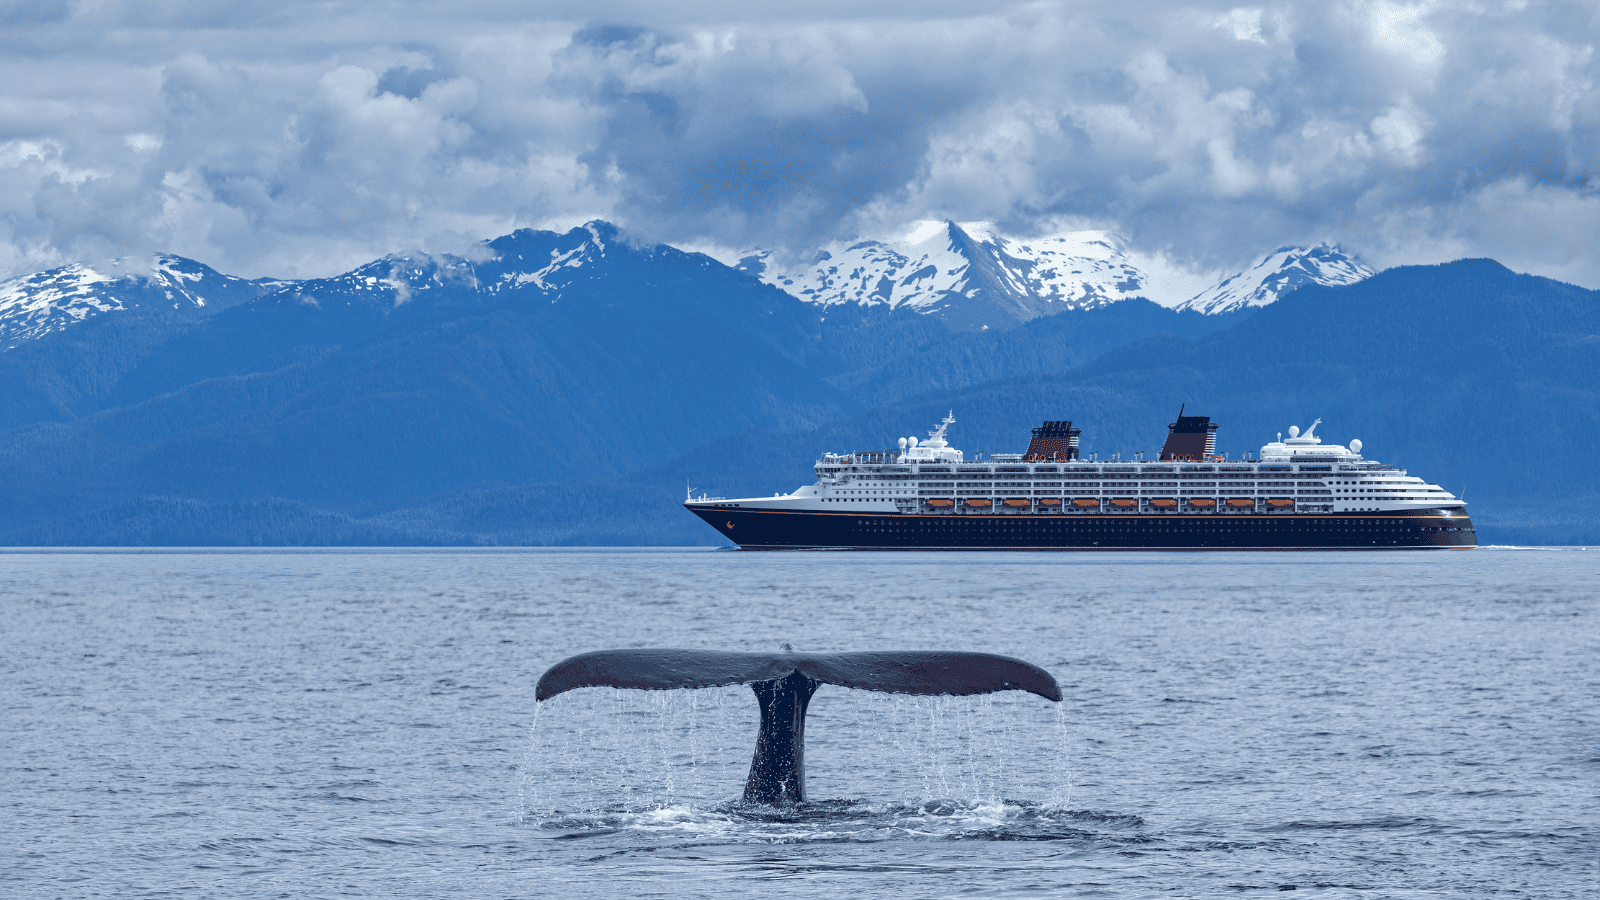 <p><a href="https://www.silversea.com/destinations/alaska-cruise/seward-anchorage-alaska-to-vancouver-ss240510s13.html" rel="nofollow external noopener noreferrer">Silversea Cruises</a> provides splurge-worthy excursions along the Alaska coastline. Witness jaw-dropping views between Seward and Vancouver during 13 luxurious days of cruising. During your voyage, you’ll get a personal butler who will attend to any need you may have. These boats also don’t have any interior cabins, so you’ll be able to take in all of Alaska’s incredible views from the comfort of your room.</p><p>Itinerary highlights include the gold rush town of Wrangell and whale-watching in Haines. Tour Alaska’s remote environment without sacrificing comfort on Silversea’s premier cruise. </p>